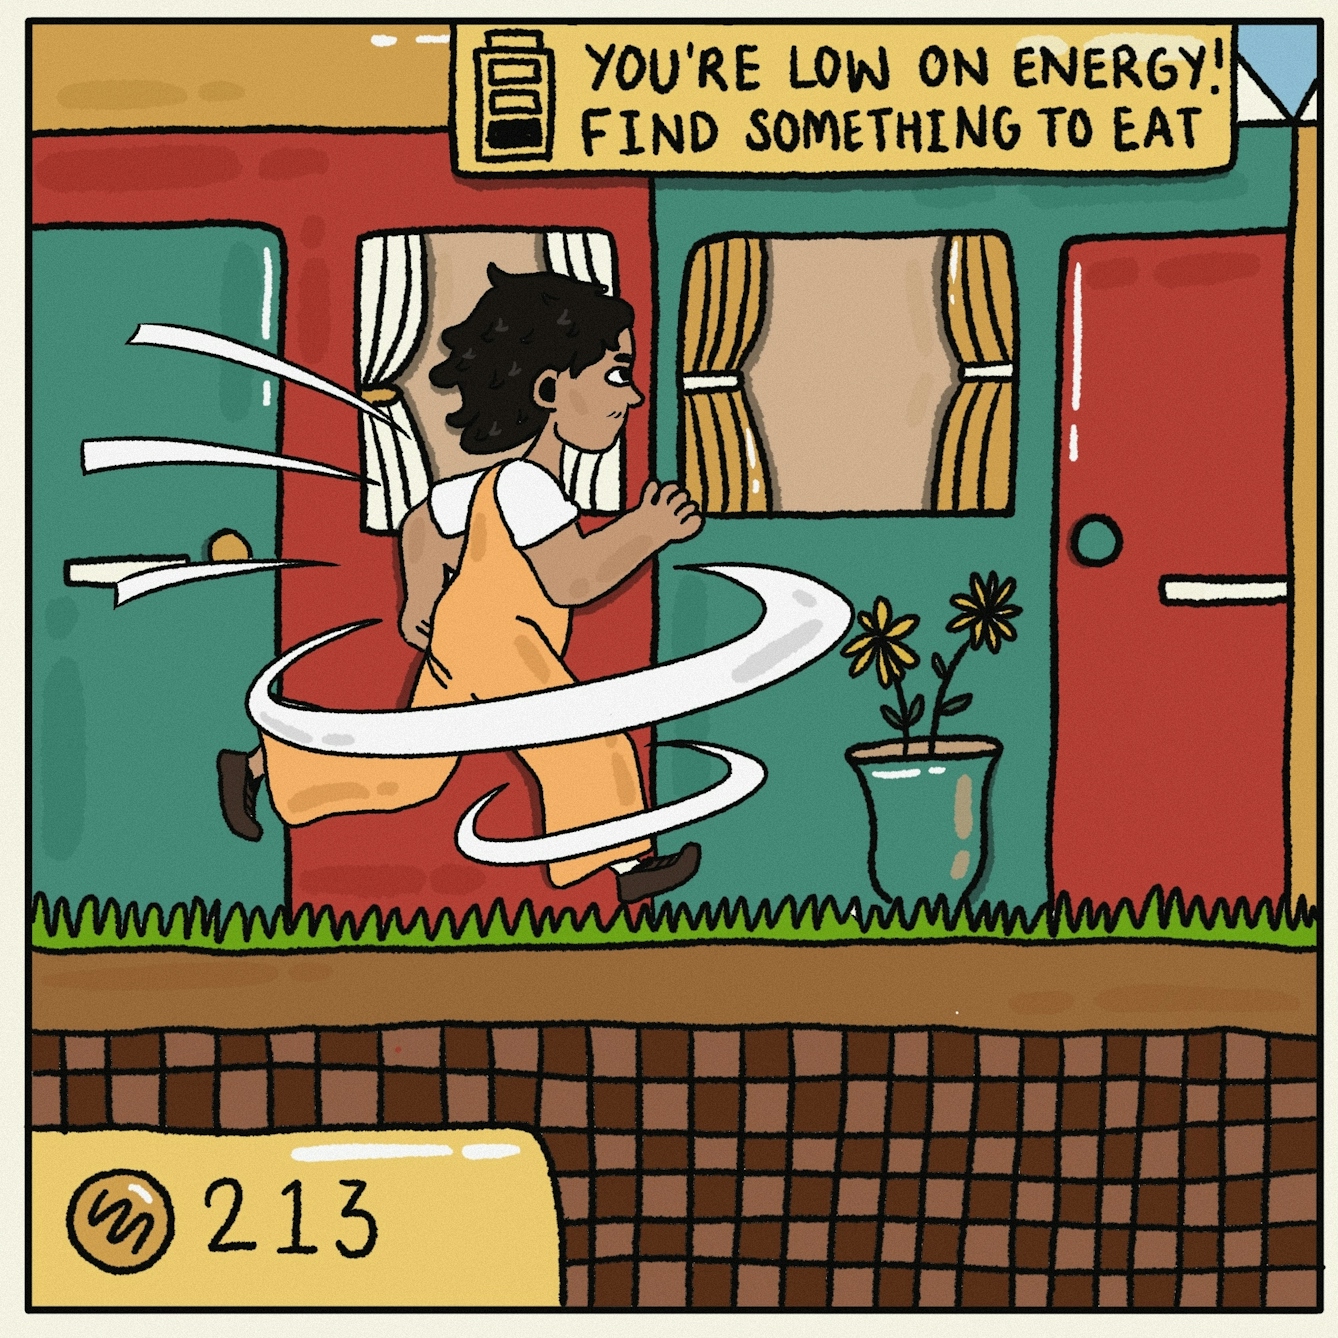 Panel 3 of a digitally drawn, four-panel comic titled ‘Gluten-free economy’. Your character is on the run, but a warning sign at the top reads: “You’re low on energy! Find something to eat.” You have 213 coins in your wallet. 